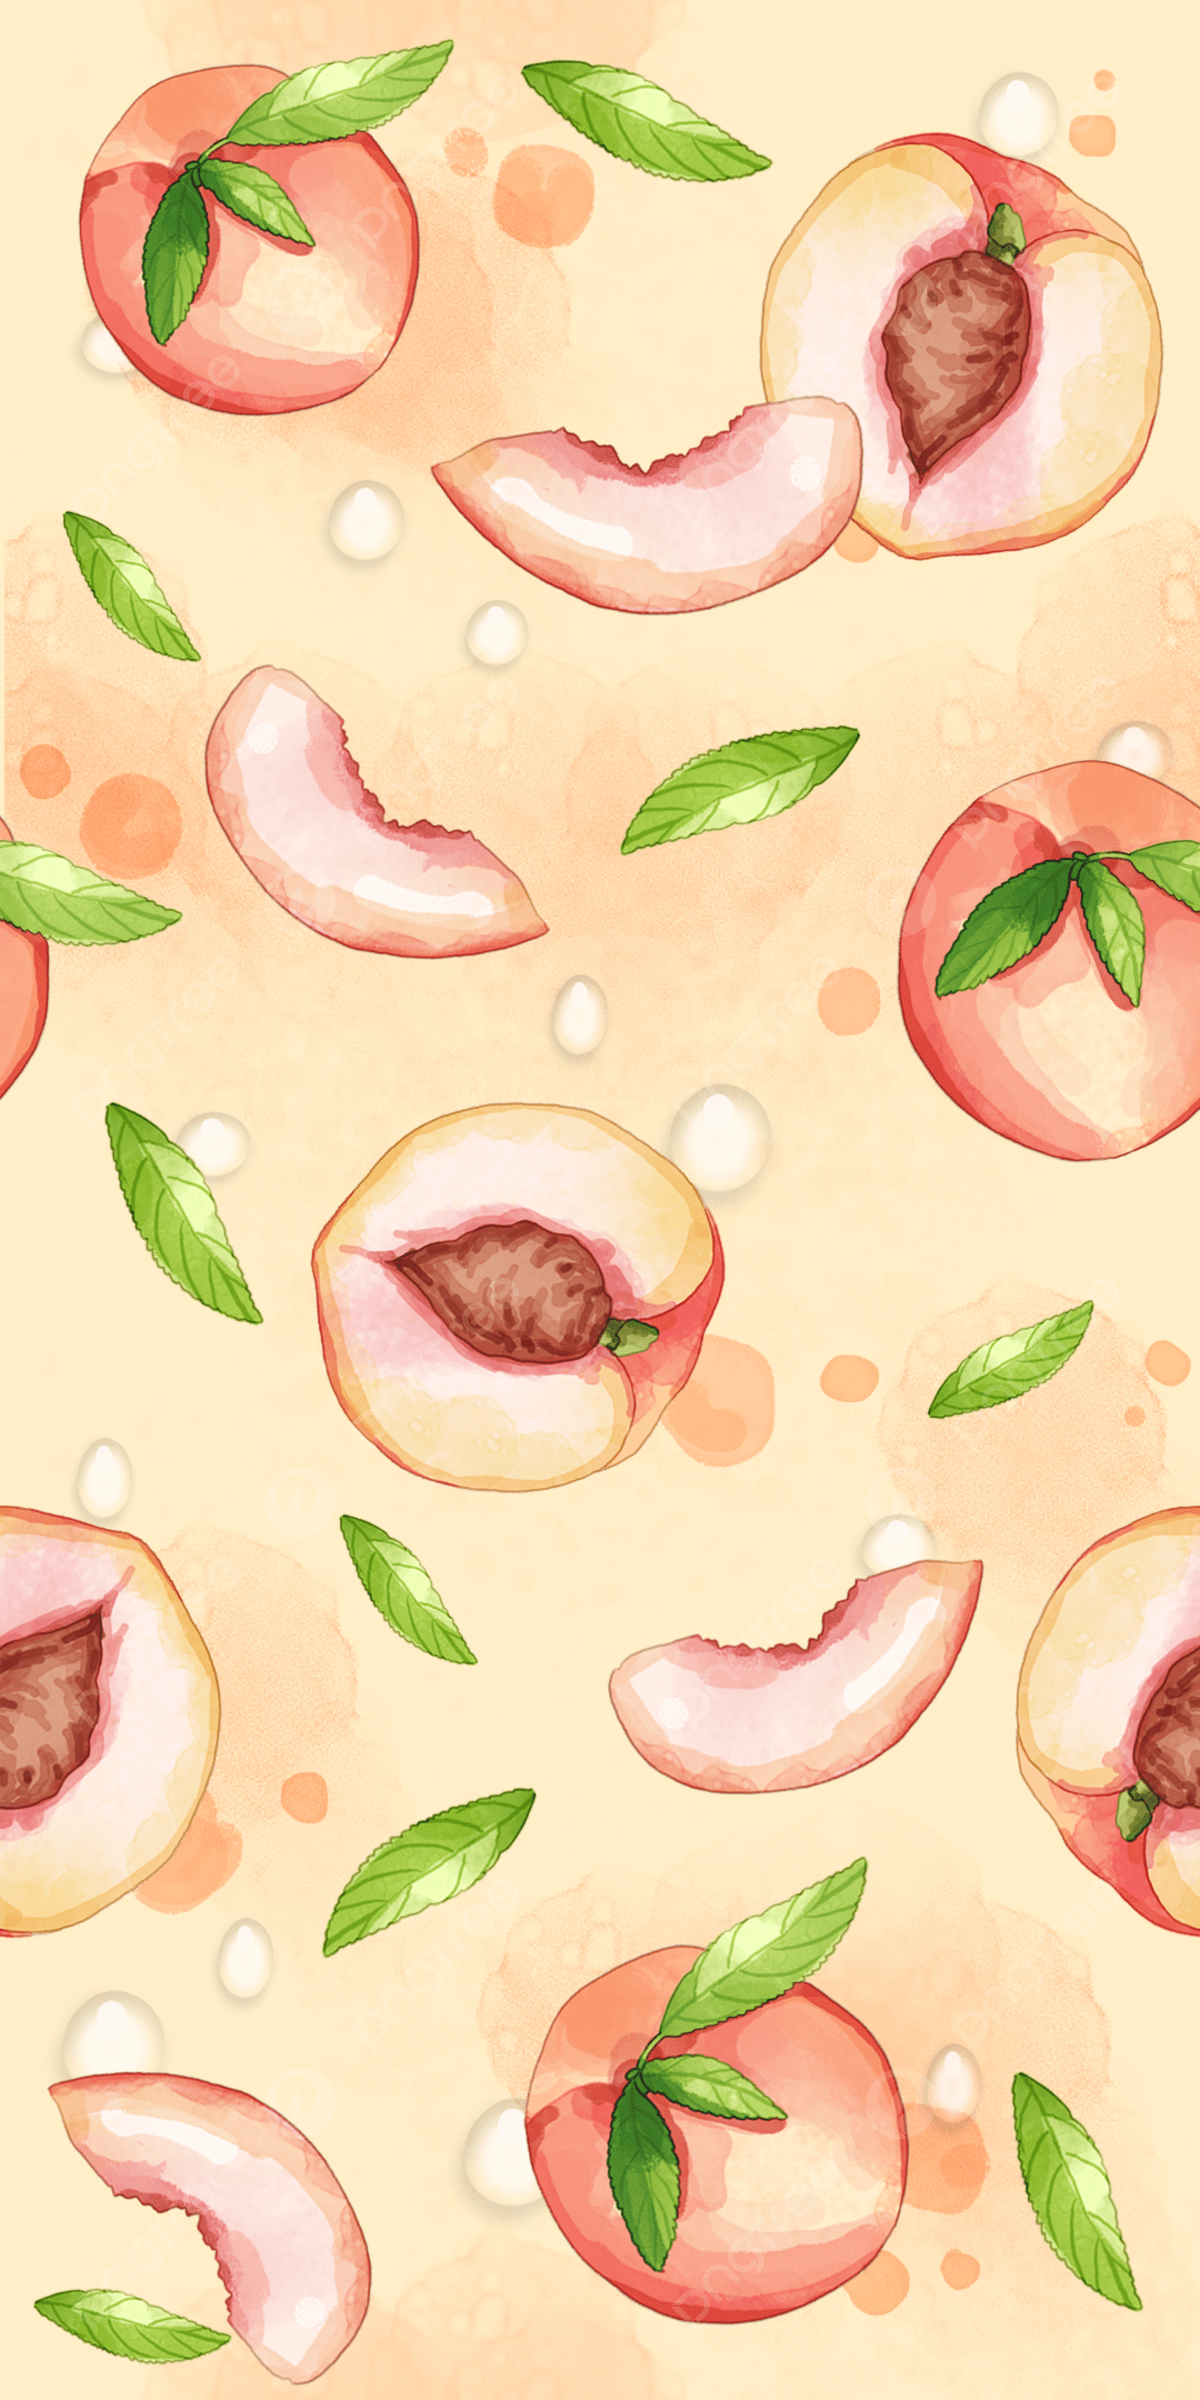 A pattern of whole and sliced peaches and leaves on a peach-colored background. - Fruit, peach